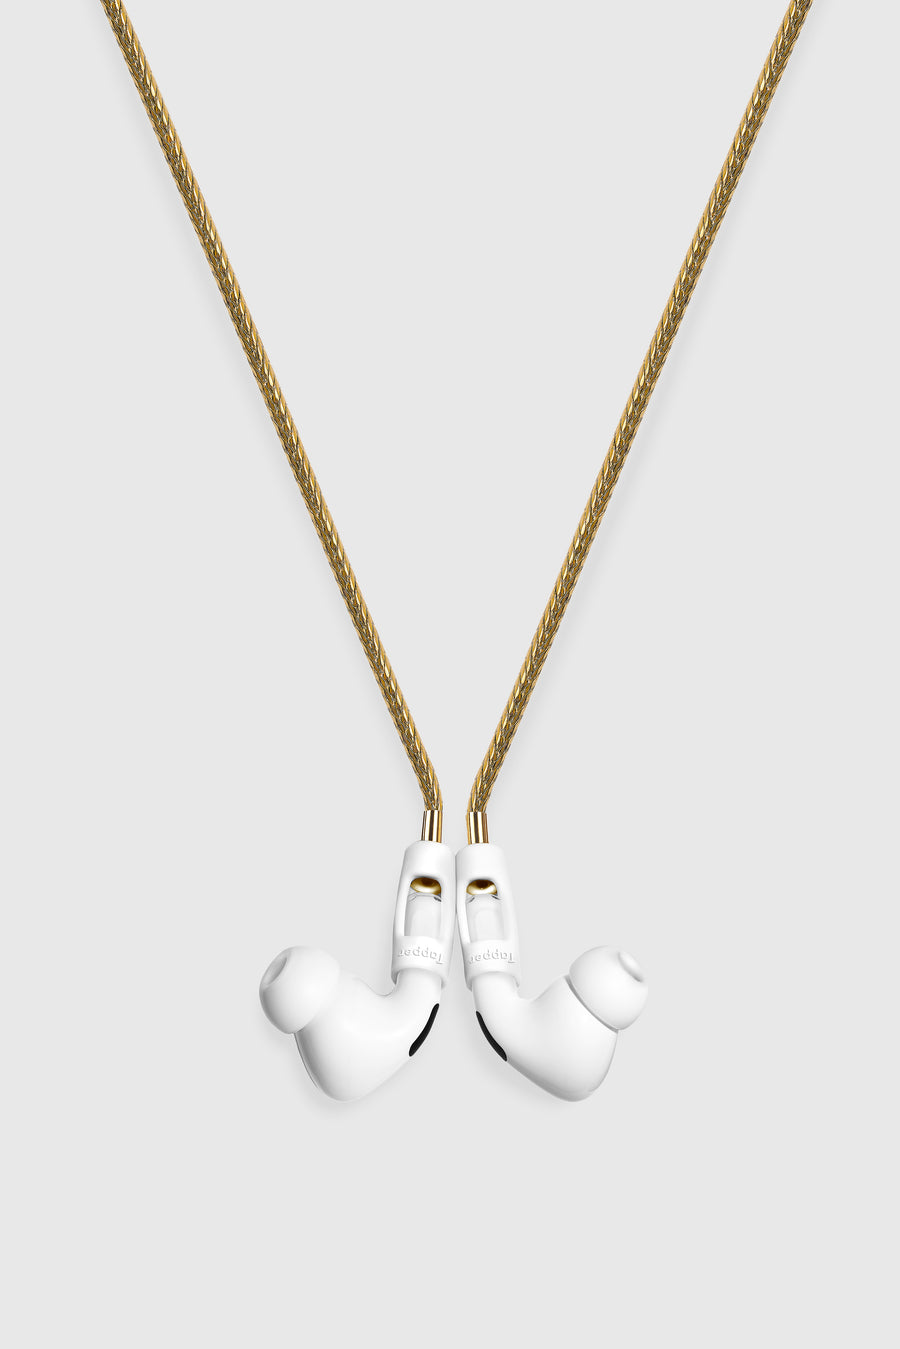 Tapper's real 18K gold plated original tech jewelry foxtail chain protects your AirPods. The luxurious, elevated and accessible necklace plated in precious metals steps up your AirPod jewellery game. Worried about losing your AirPods? Magnetic lock for convenient and hassle-free safekeeping around the neck. The next must-have AirPods accessory crafted for ultimate luxury. Compatible with all generations of Apple AirPods and AirPods Pro. Designed in Sweden by Tapper. Free Express Shipping at gettapper.com